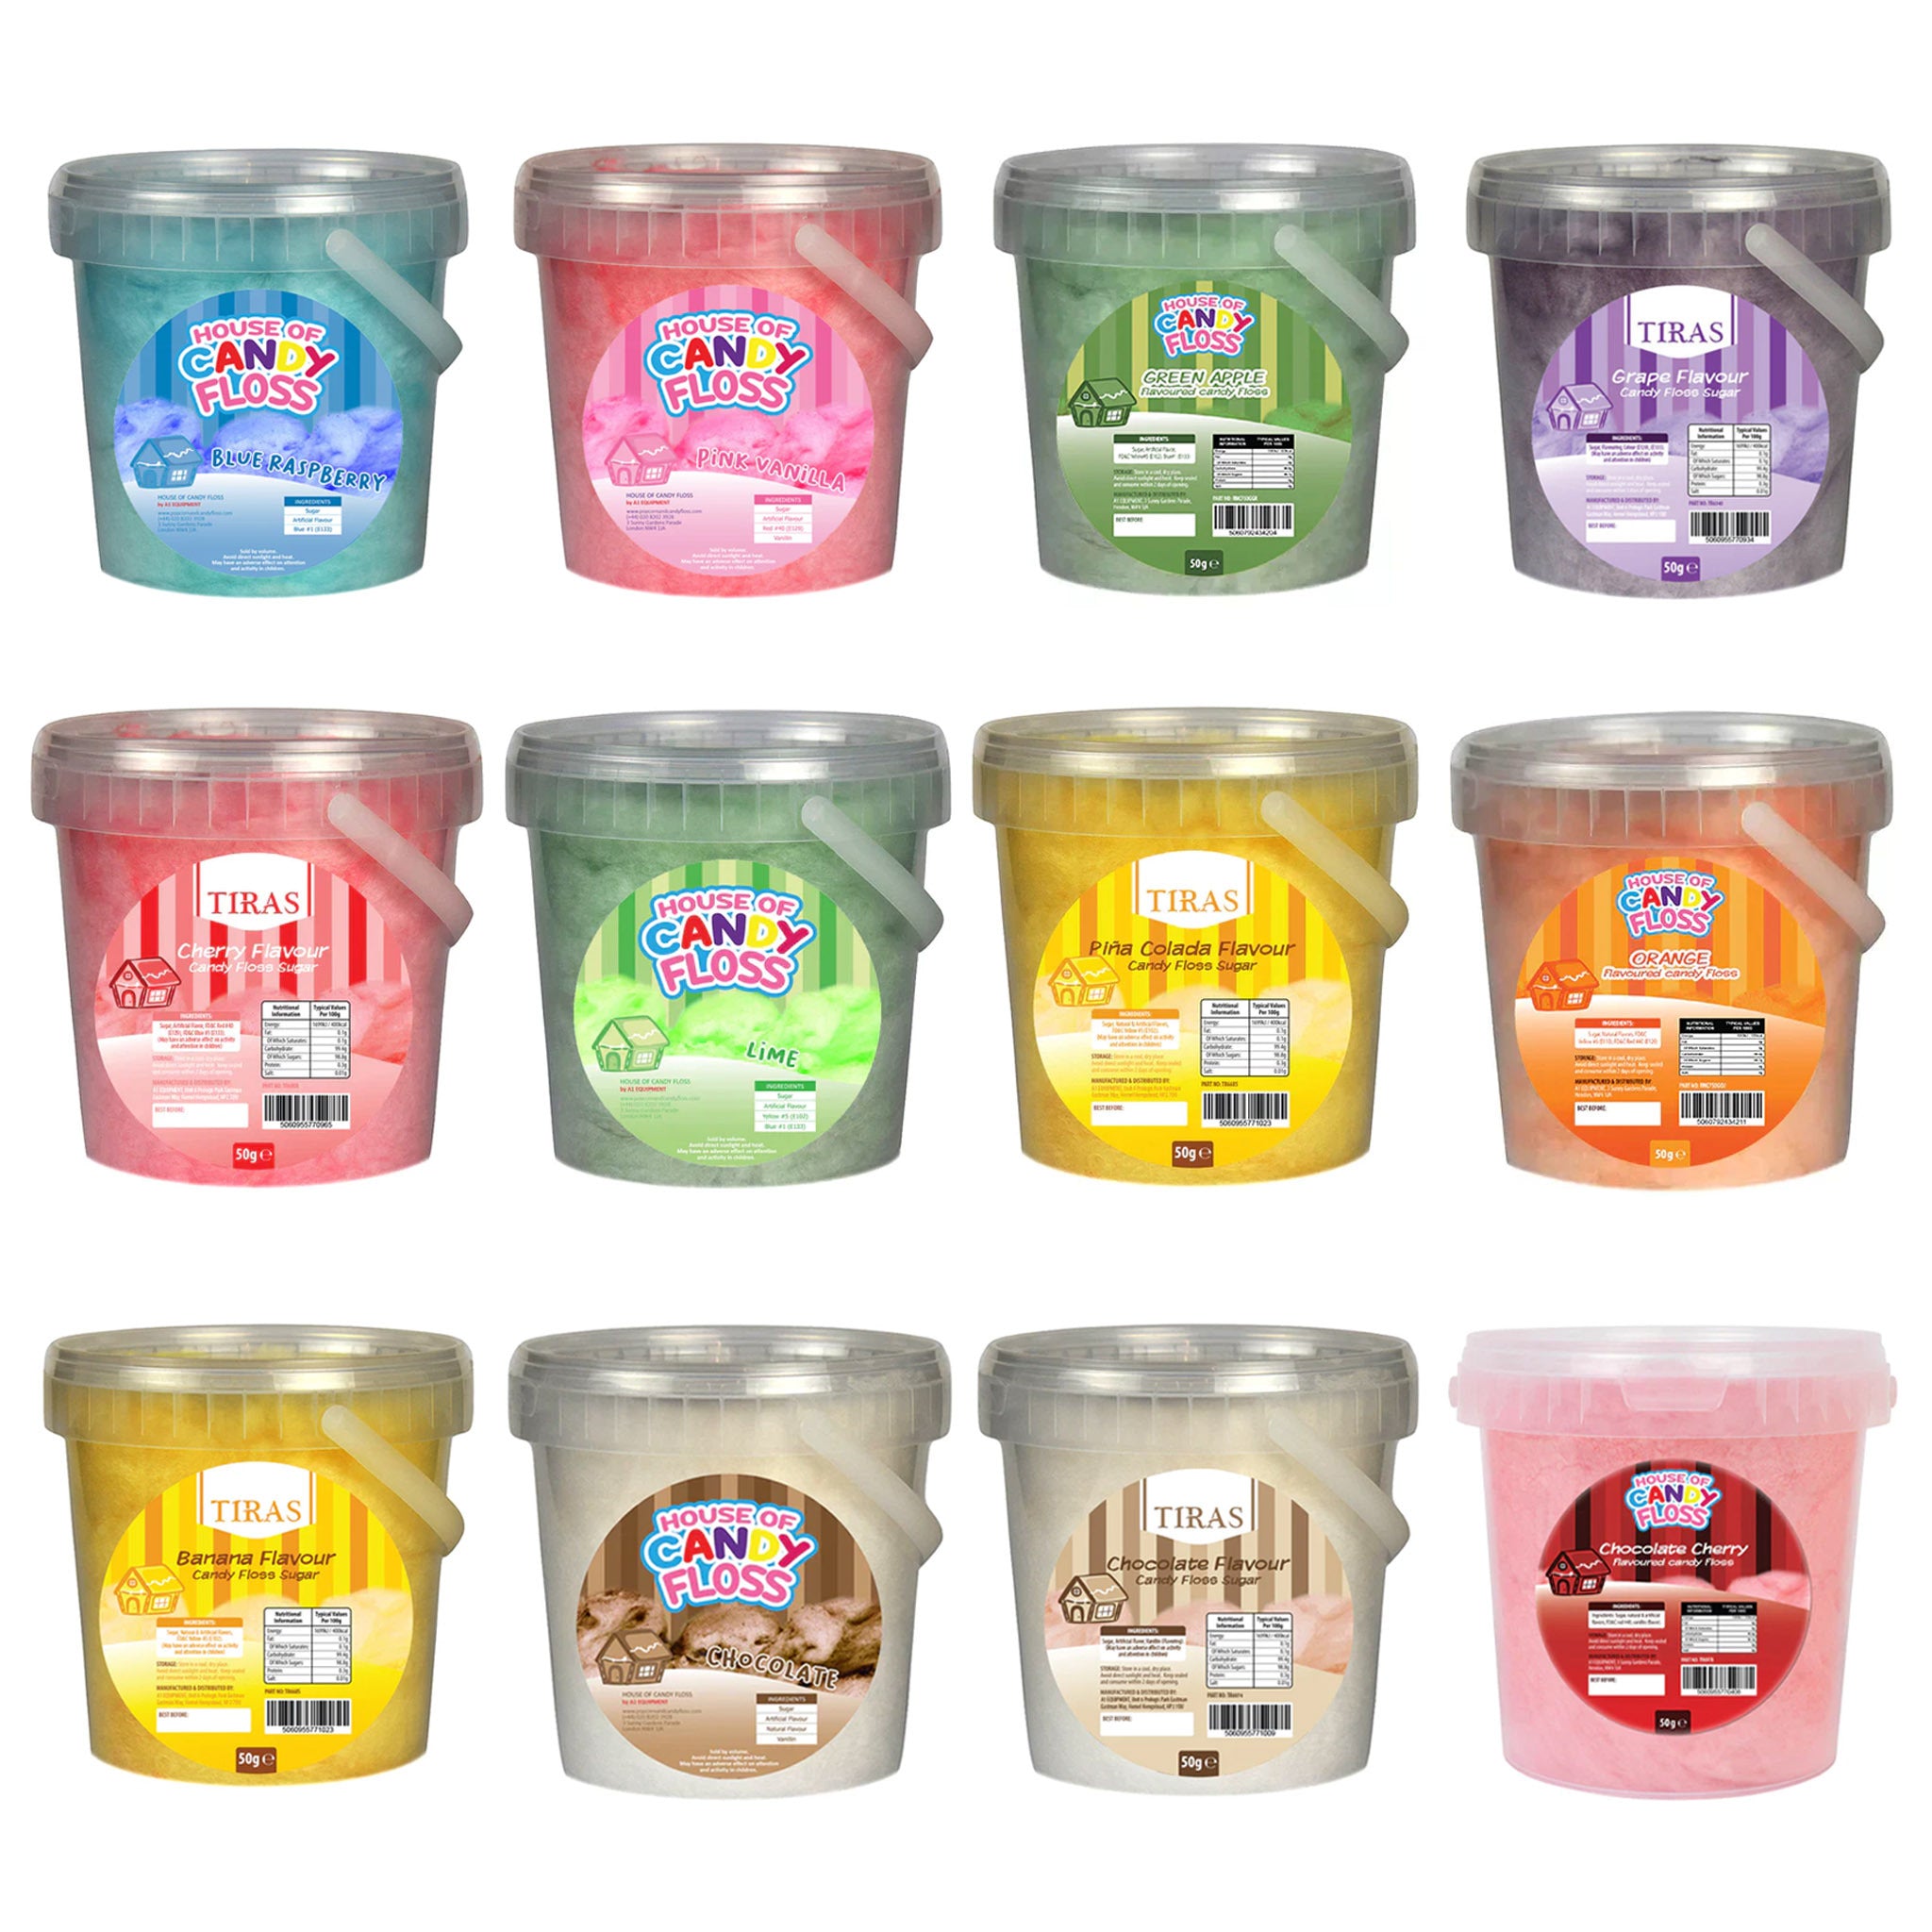 Candy Floss (Small) Tubs 50g x 96 - All Flavours